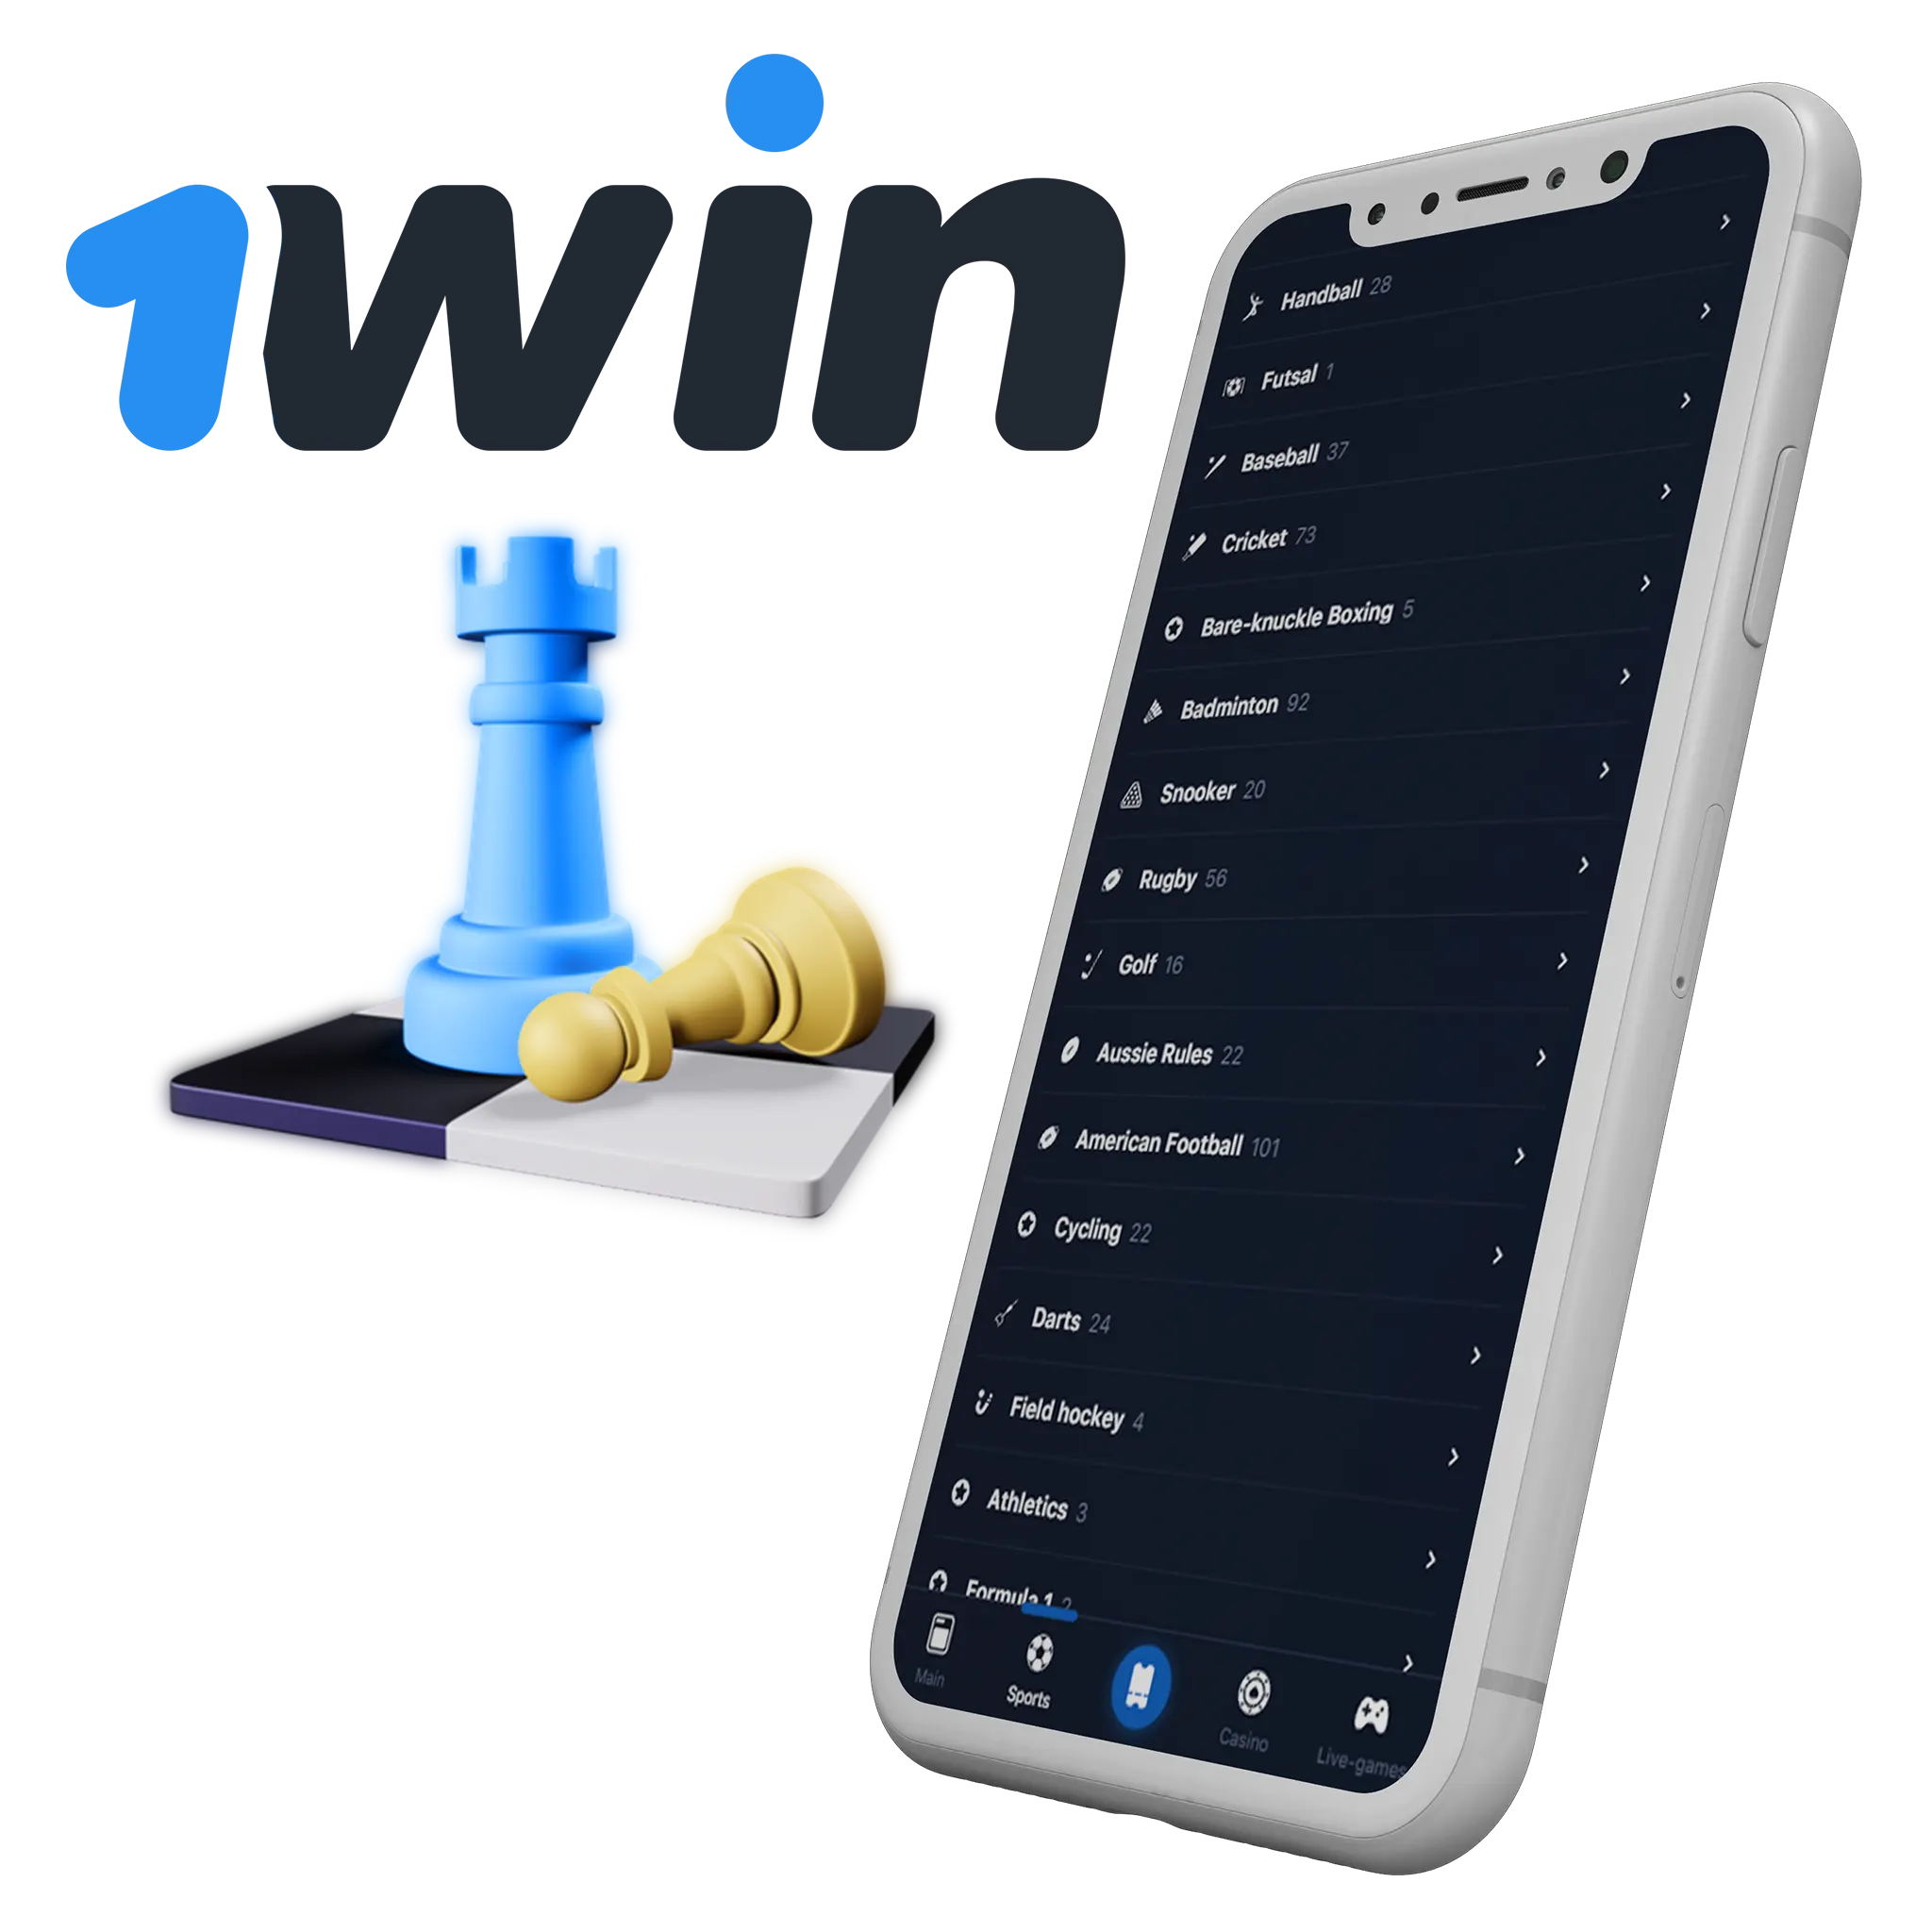 Reviews strongly suggest that 1win app is a highly user-centric platform.